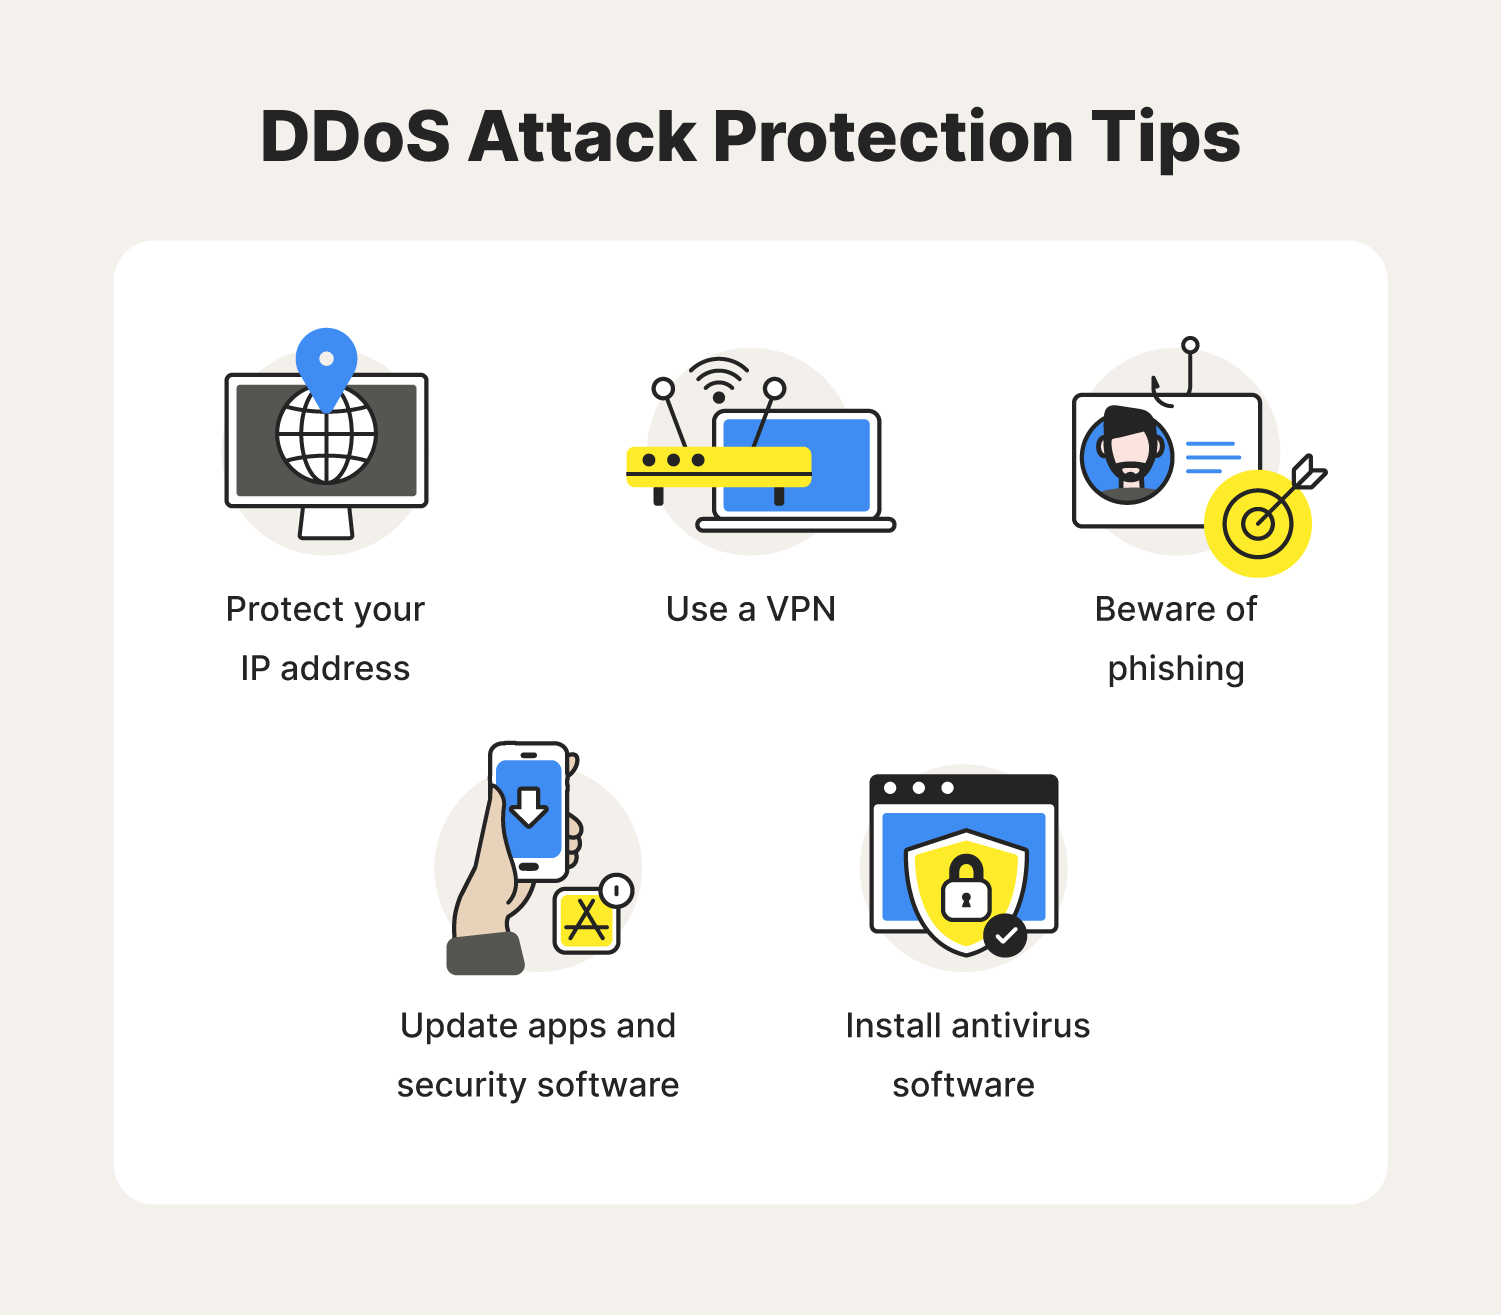 ddos attack protection tips